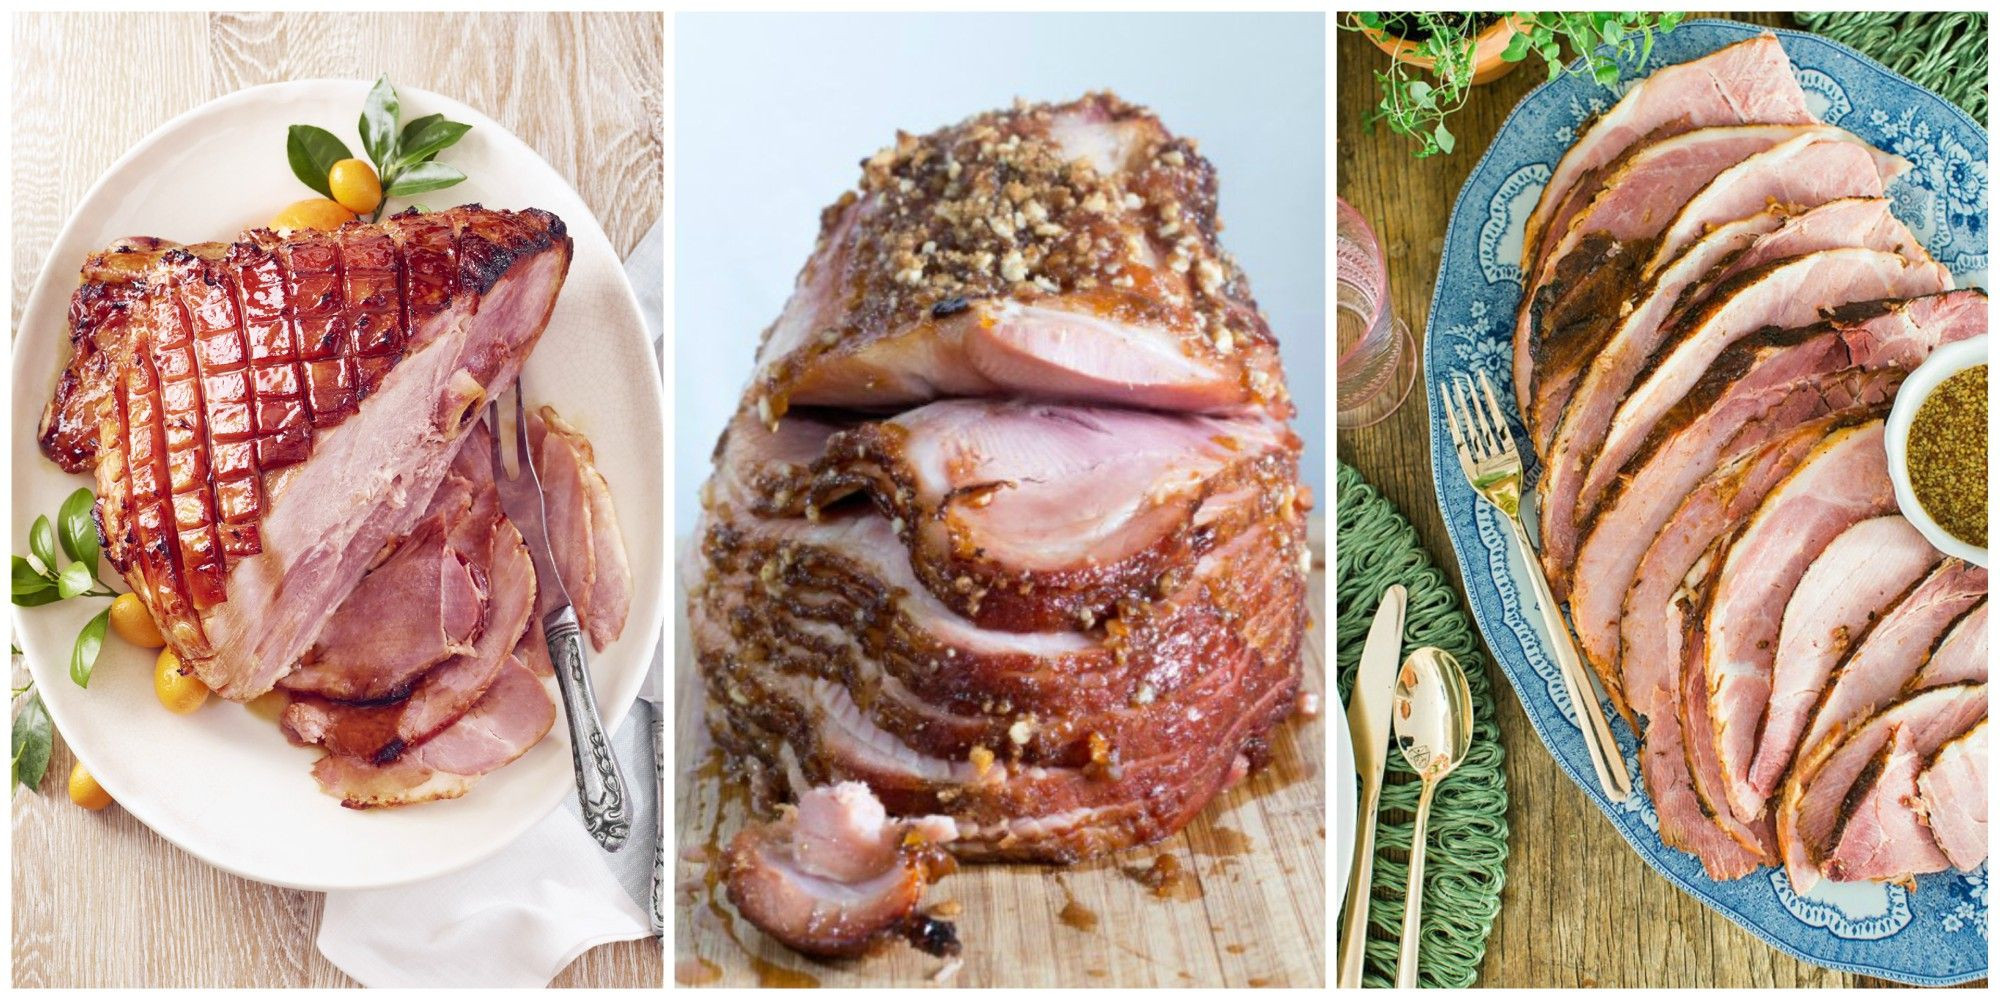 Best Easter Ham Recipe Beautiful 14 Best Easter Ham Recipes How to Make An Easter Ham